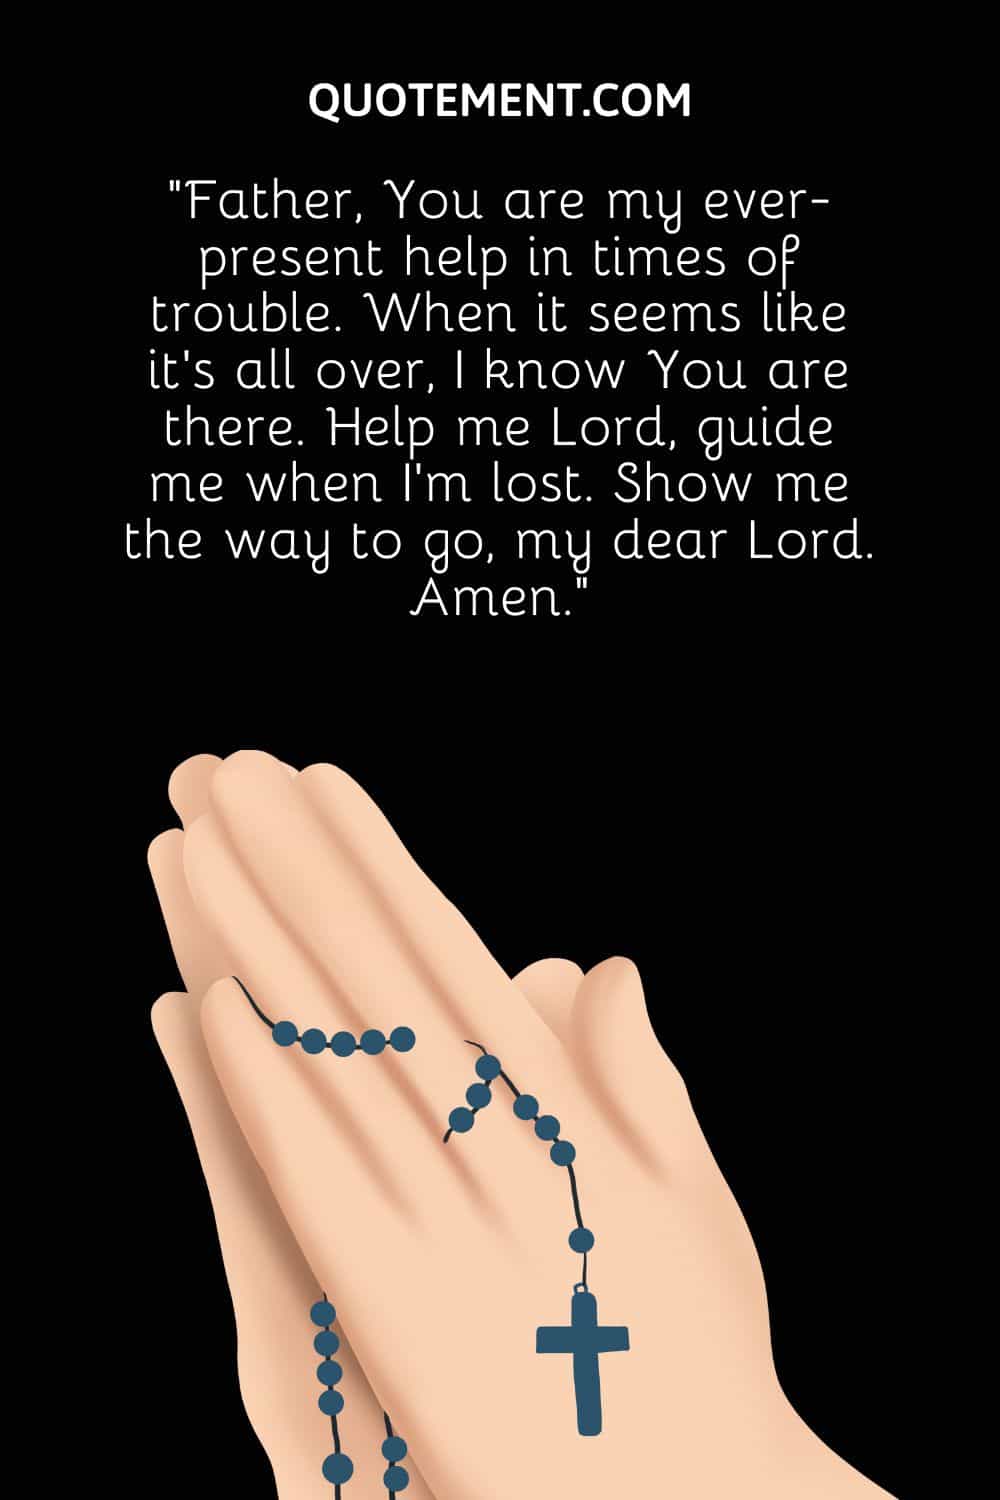 “Father, You are my ever-present help in times of trouble. When it seems like it’s all over, I know You are there. Help me Lord, guide me when I’m lost. Show me the way to go, my dear Lord. Amen.”